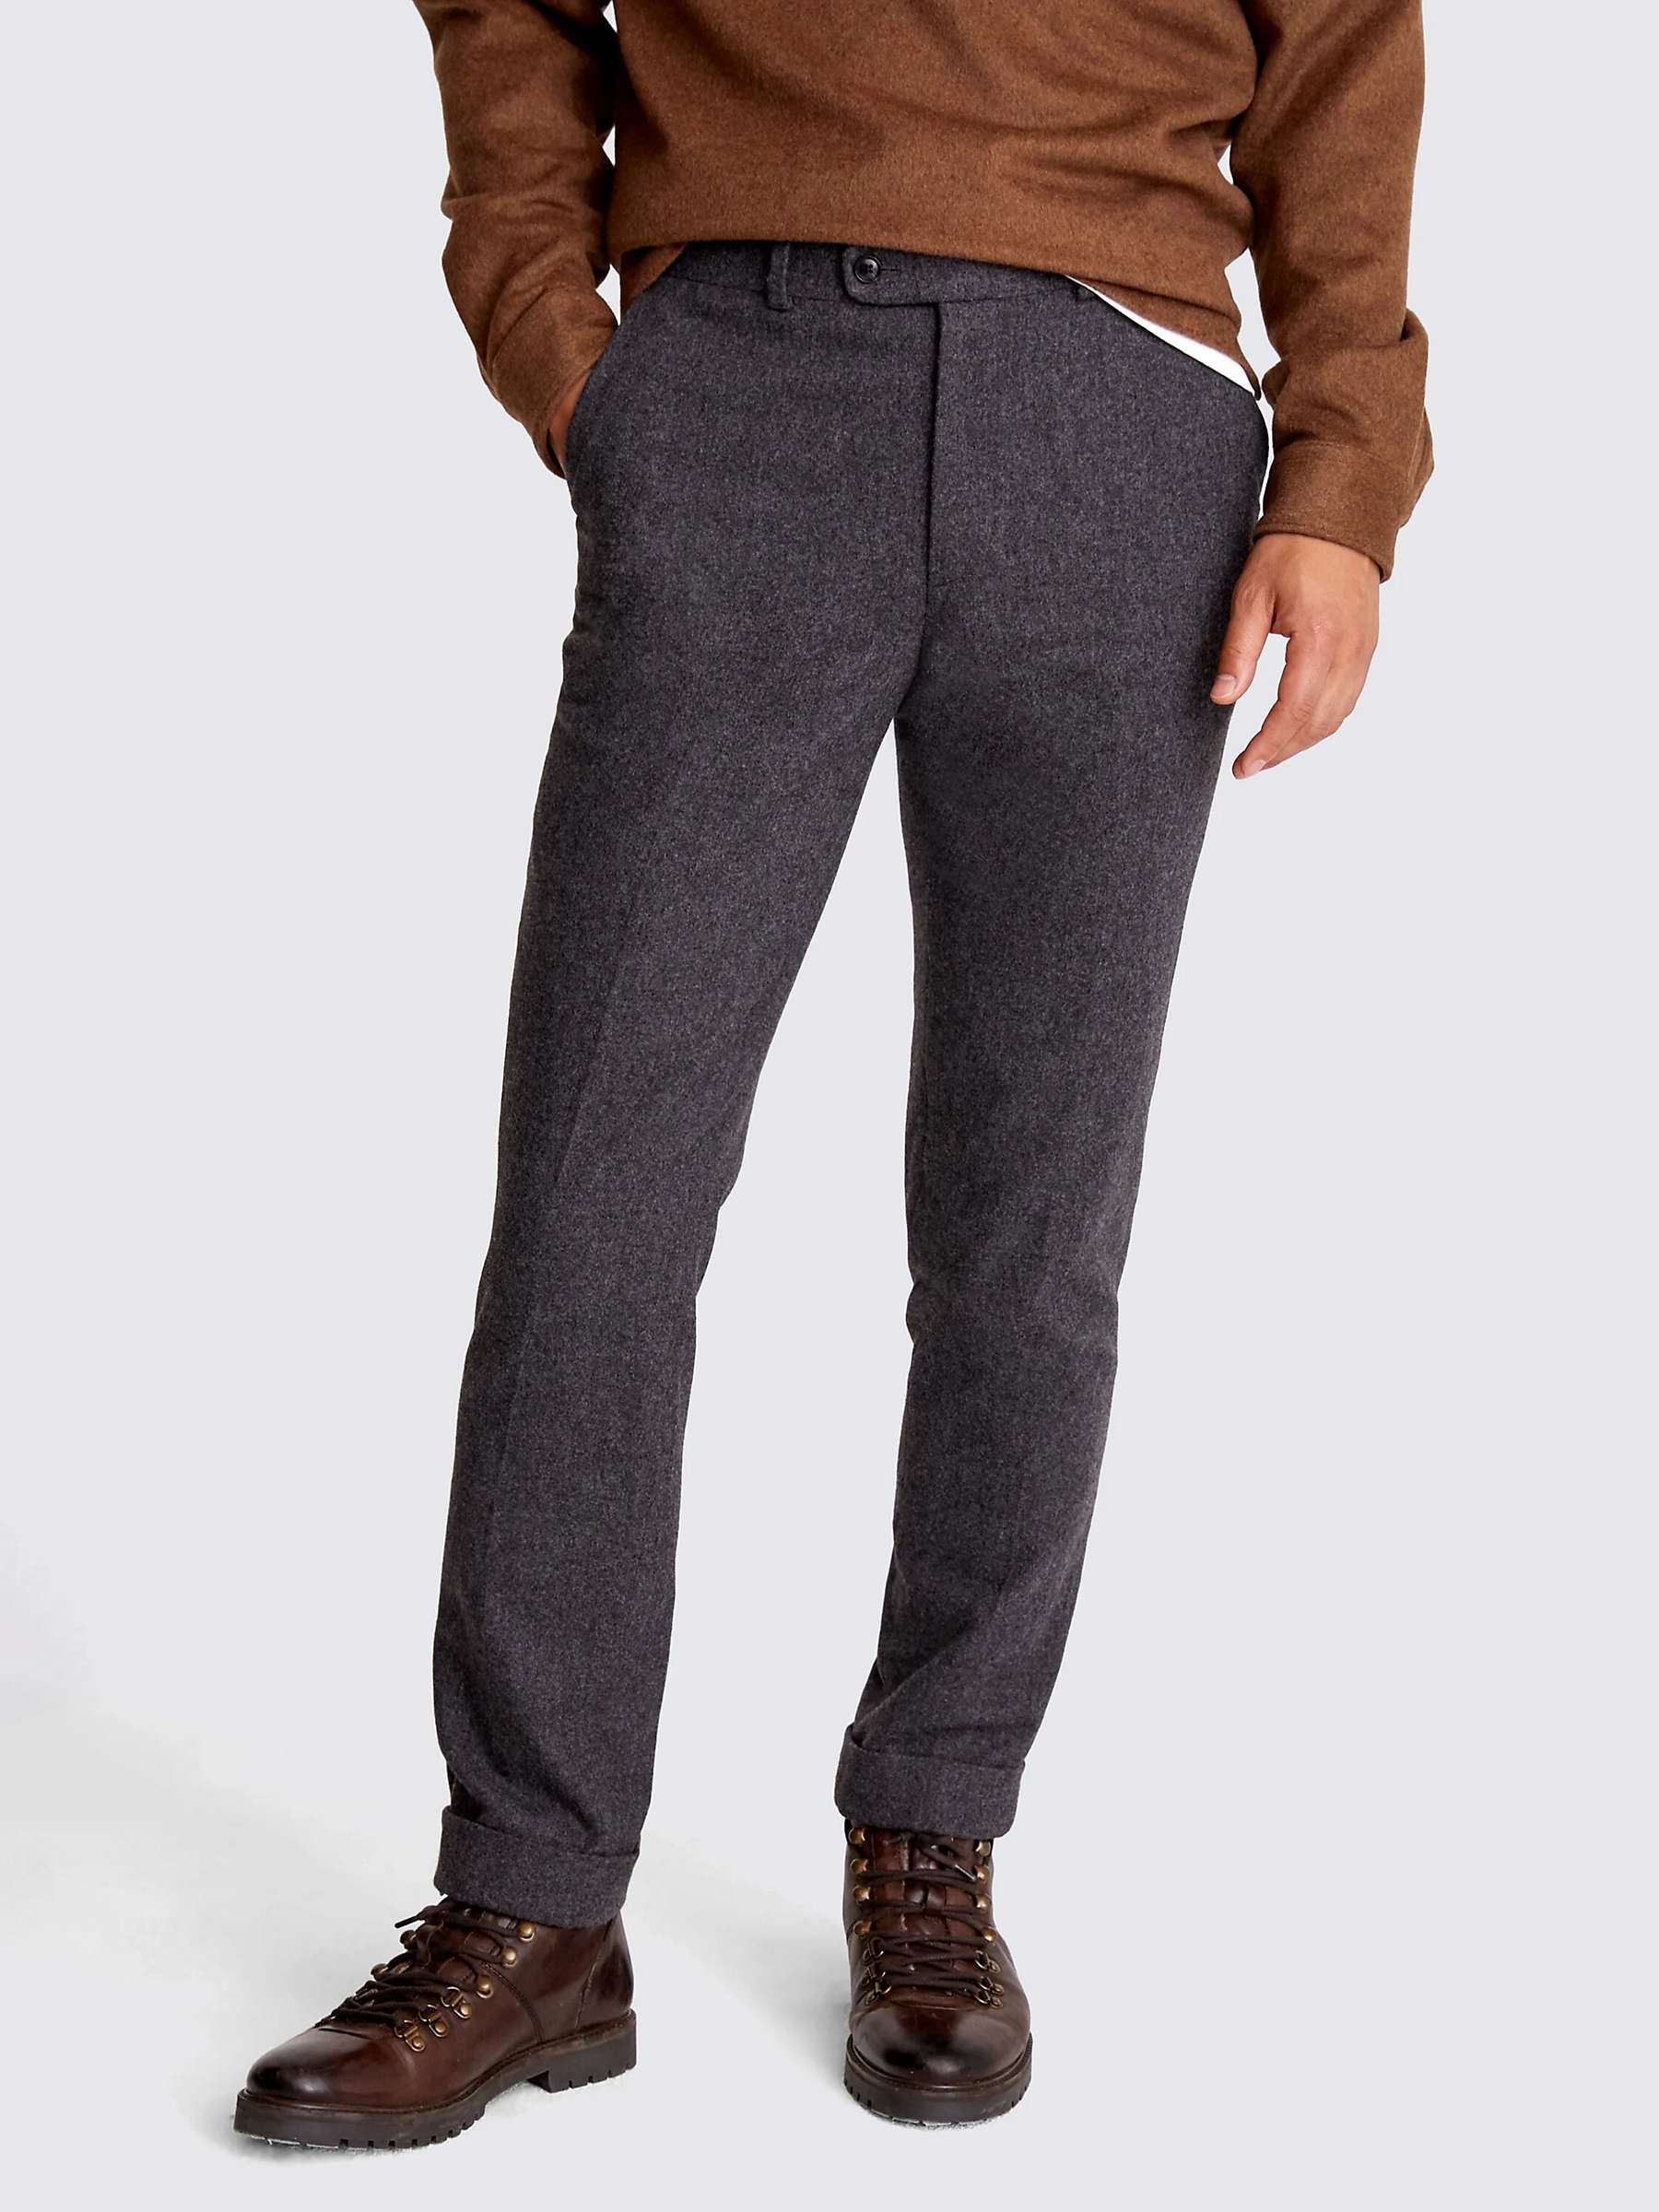 Moss Tailored Fit Flannel Trousers, Charcoal at John Lewis & Partners